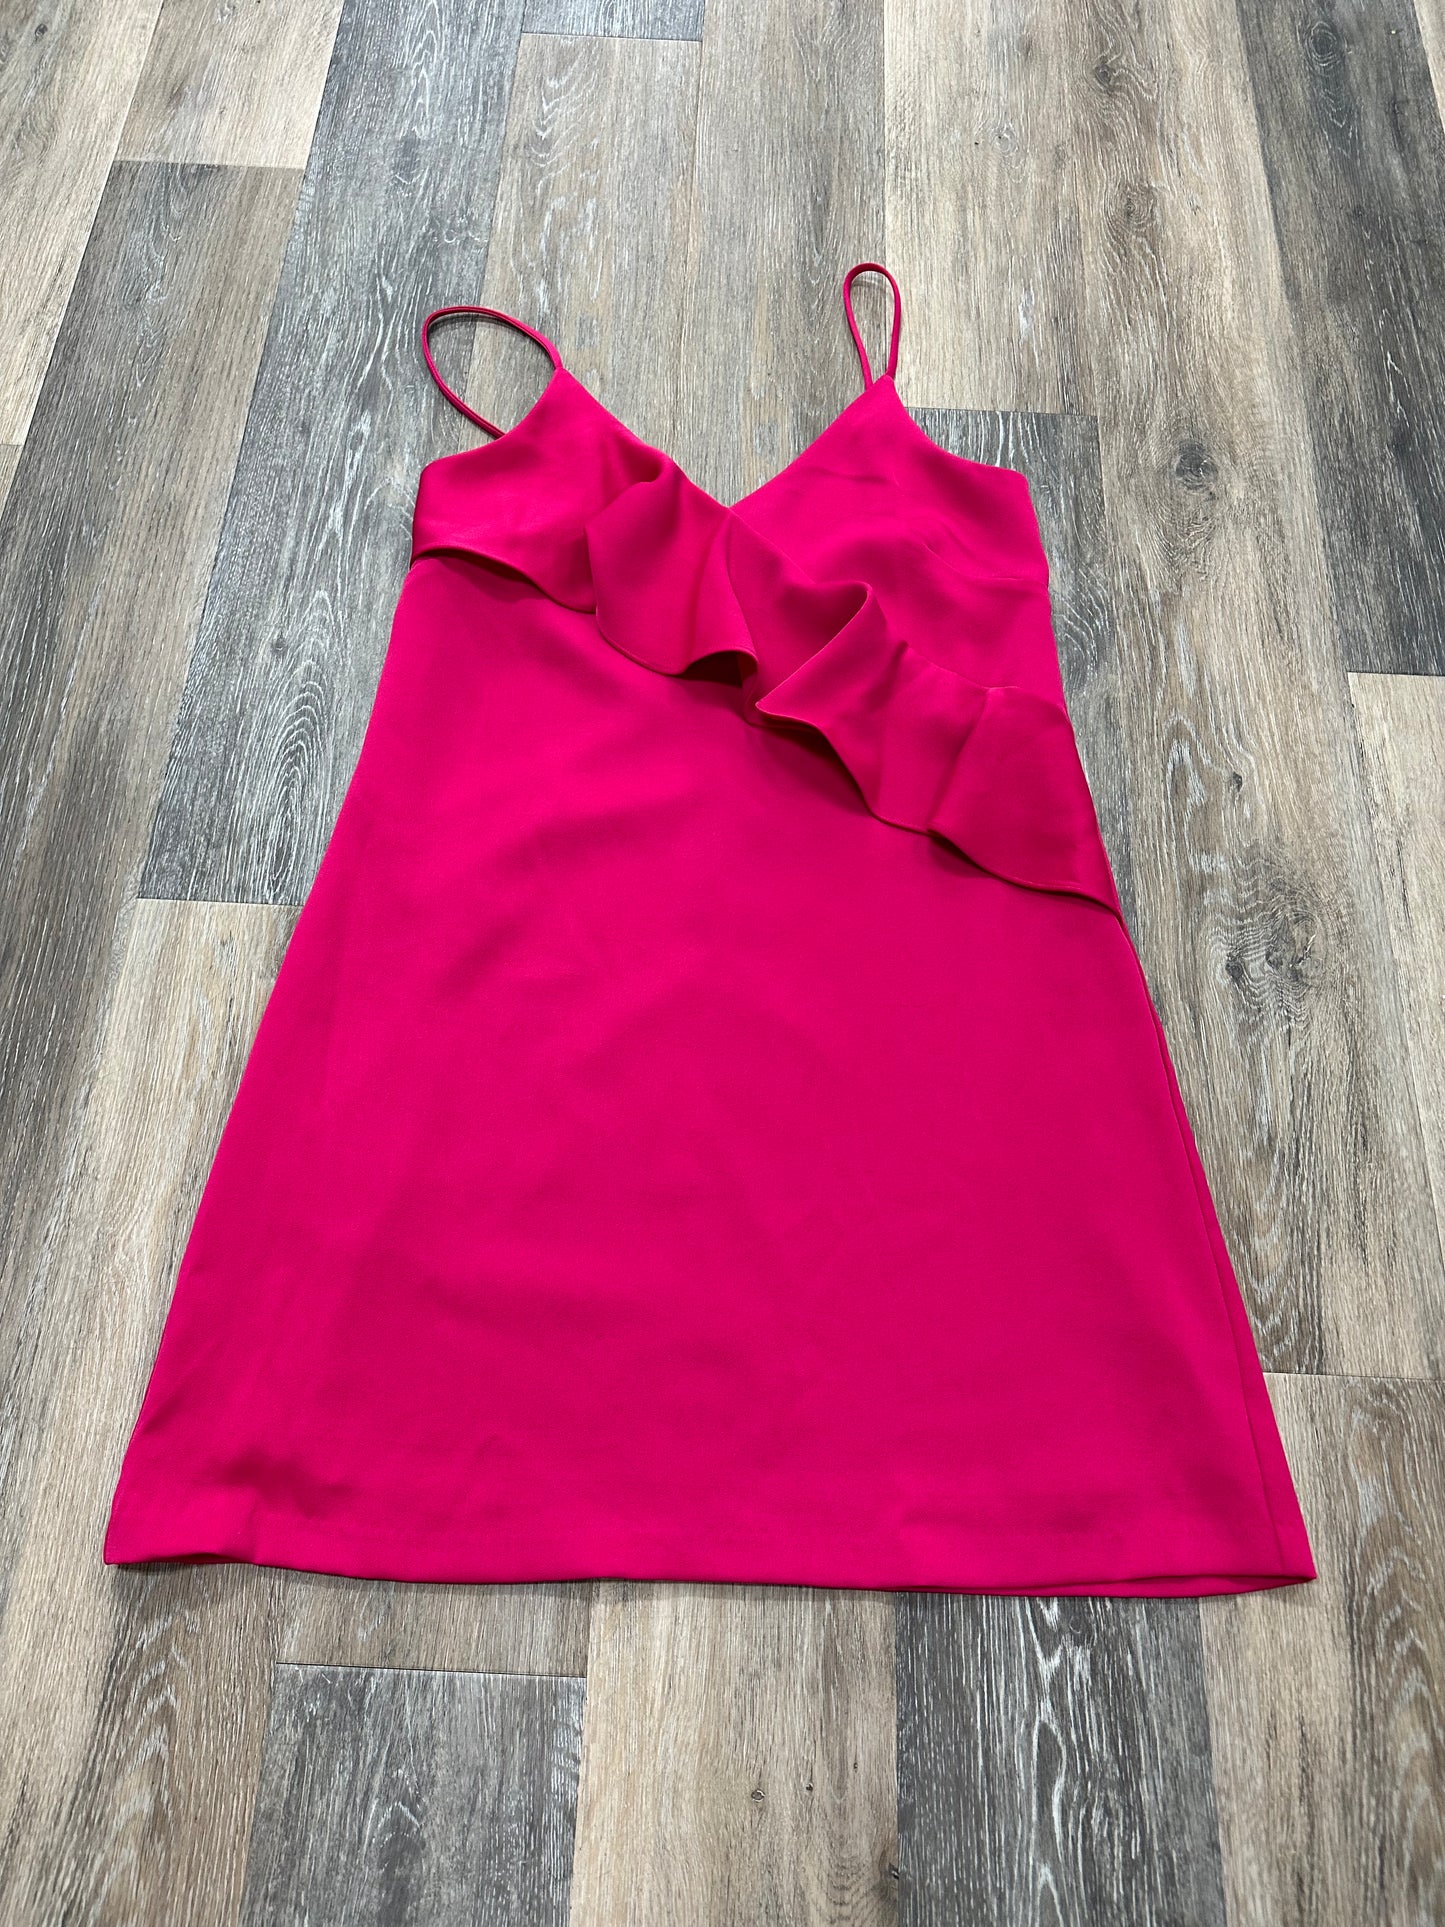 Dress Party Short By Chelsea 28  Size: M